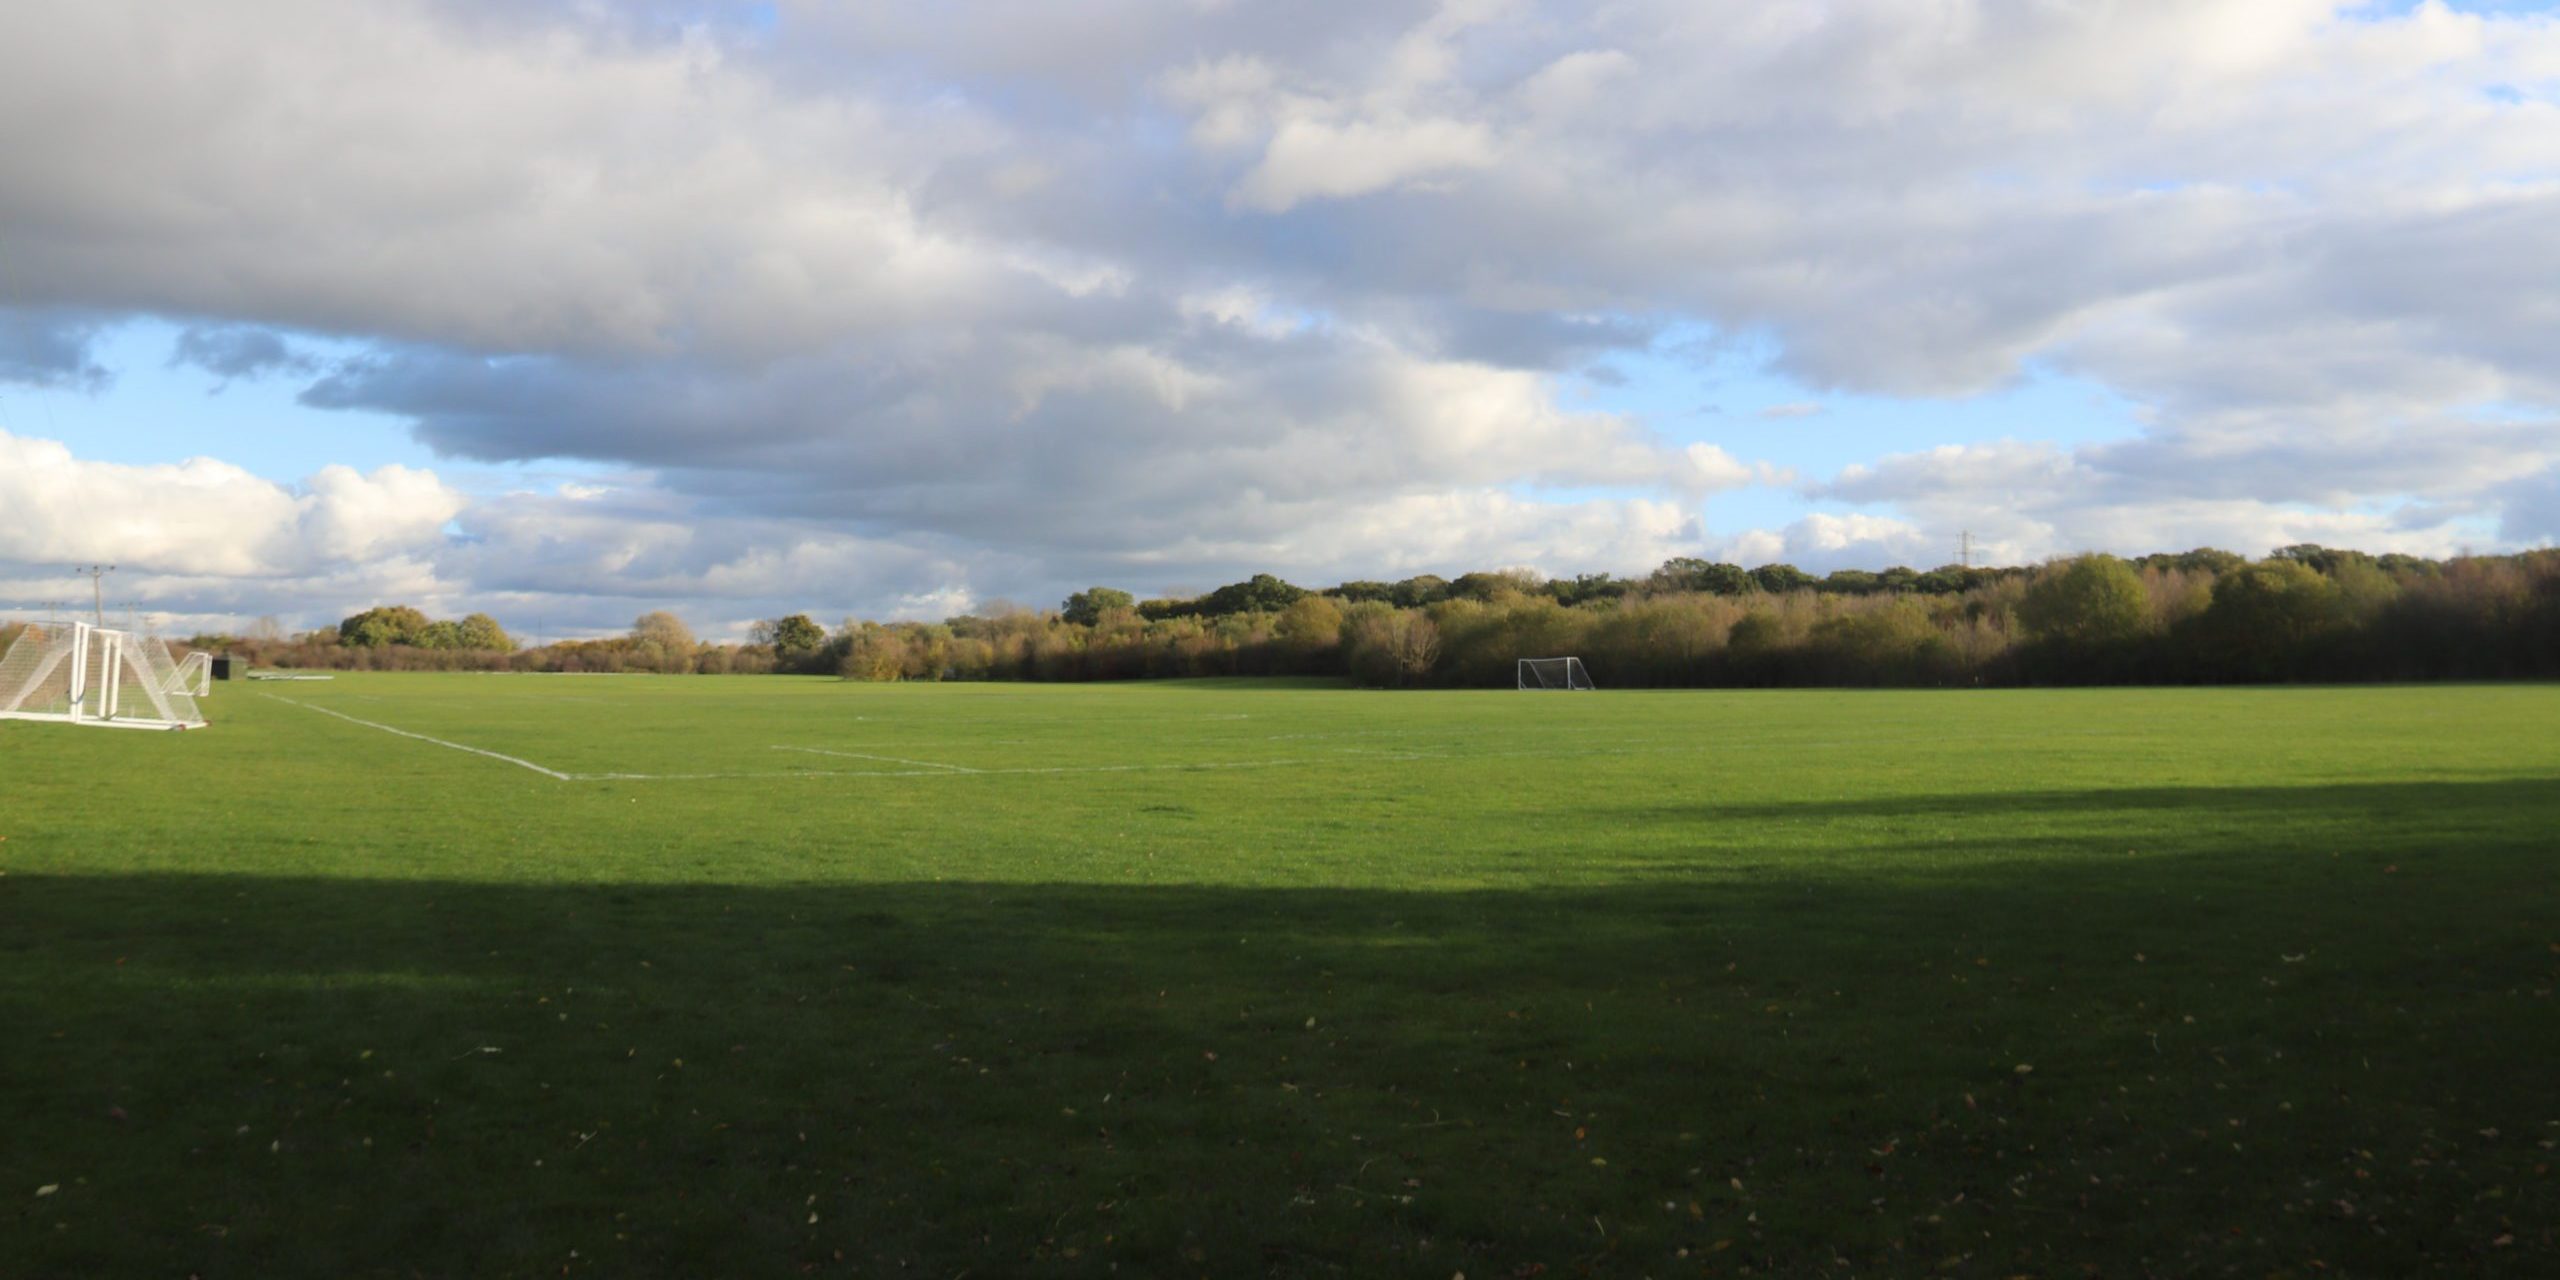 community football pitches